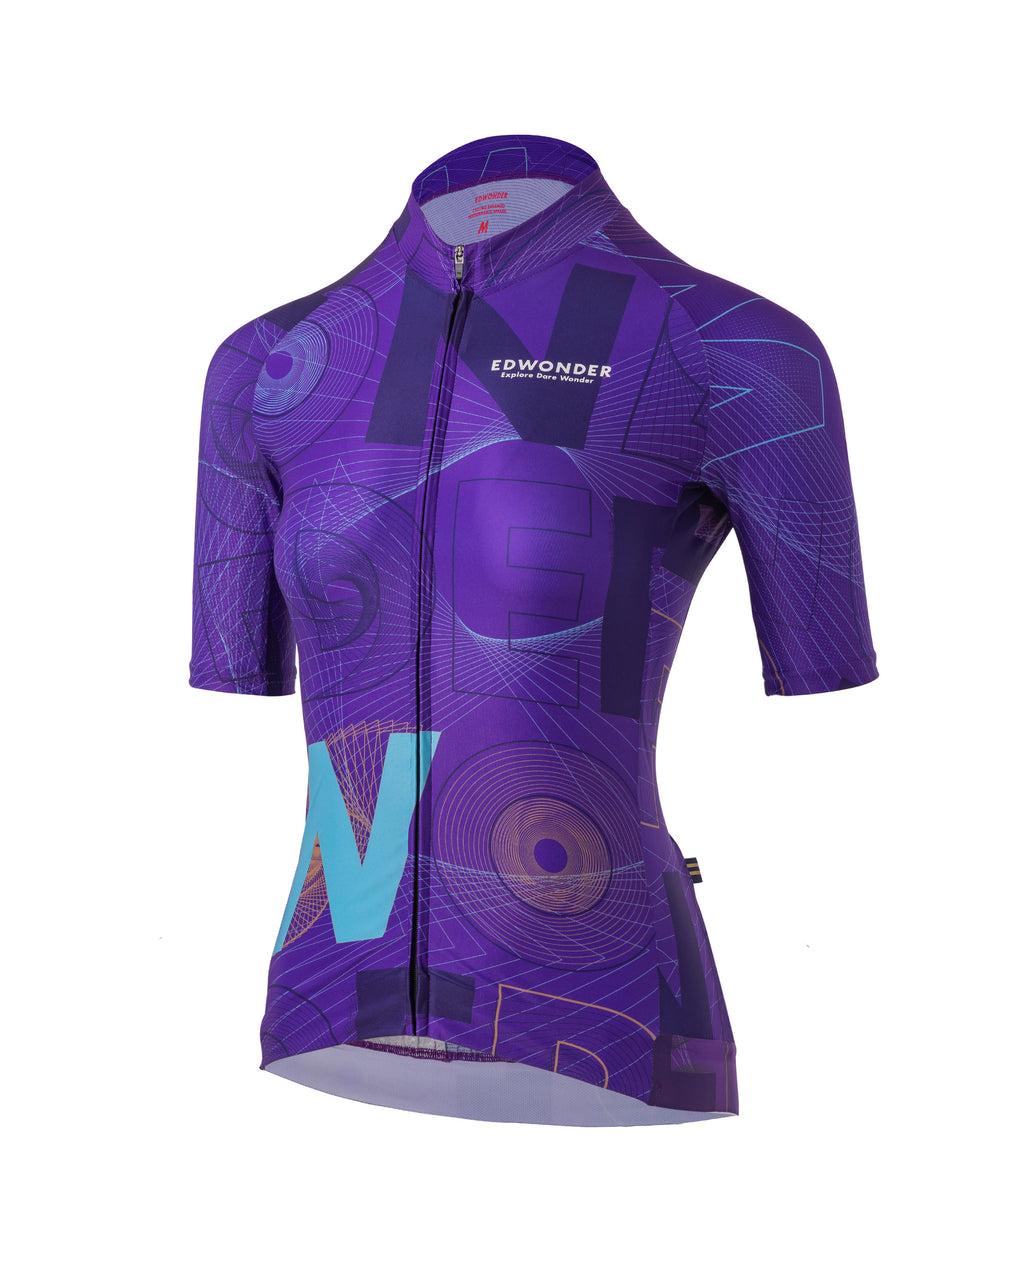 Women's Cycling Jerseys Collection